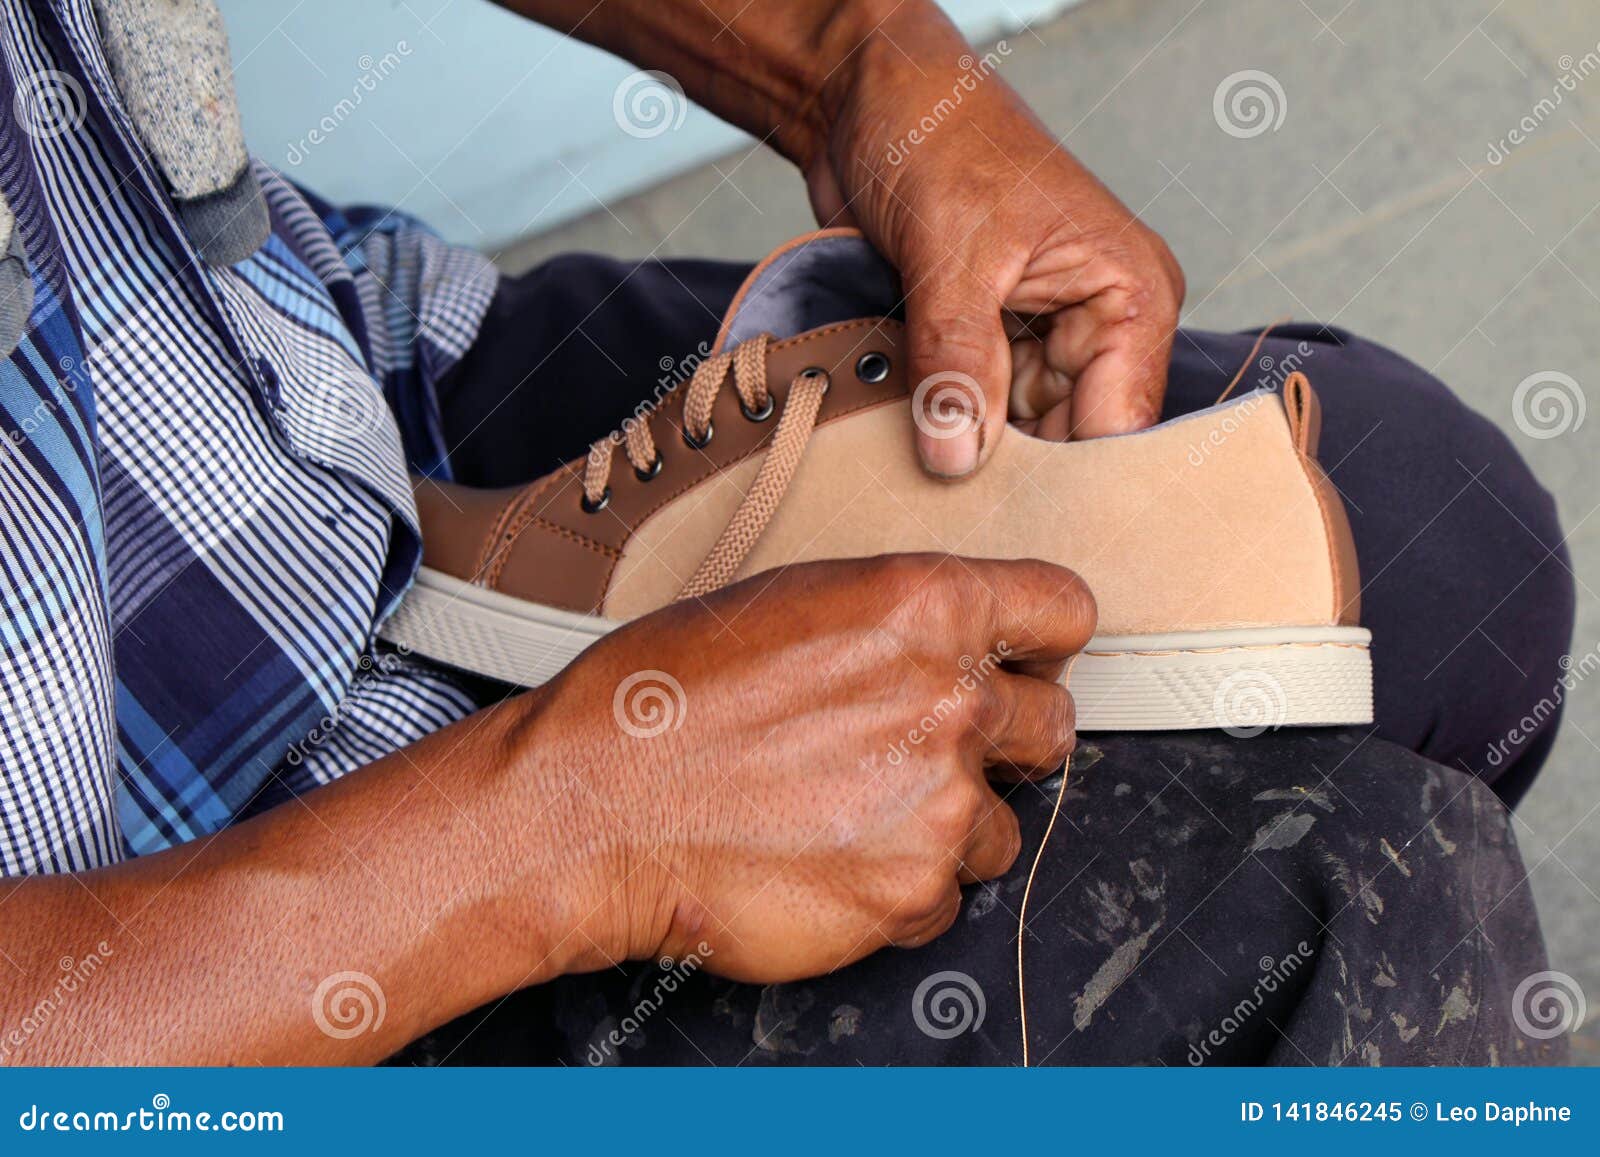 process of manual shoe reparation, sole and welt fixing and stitching